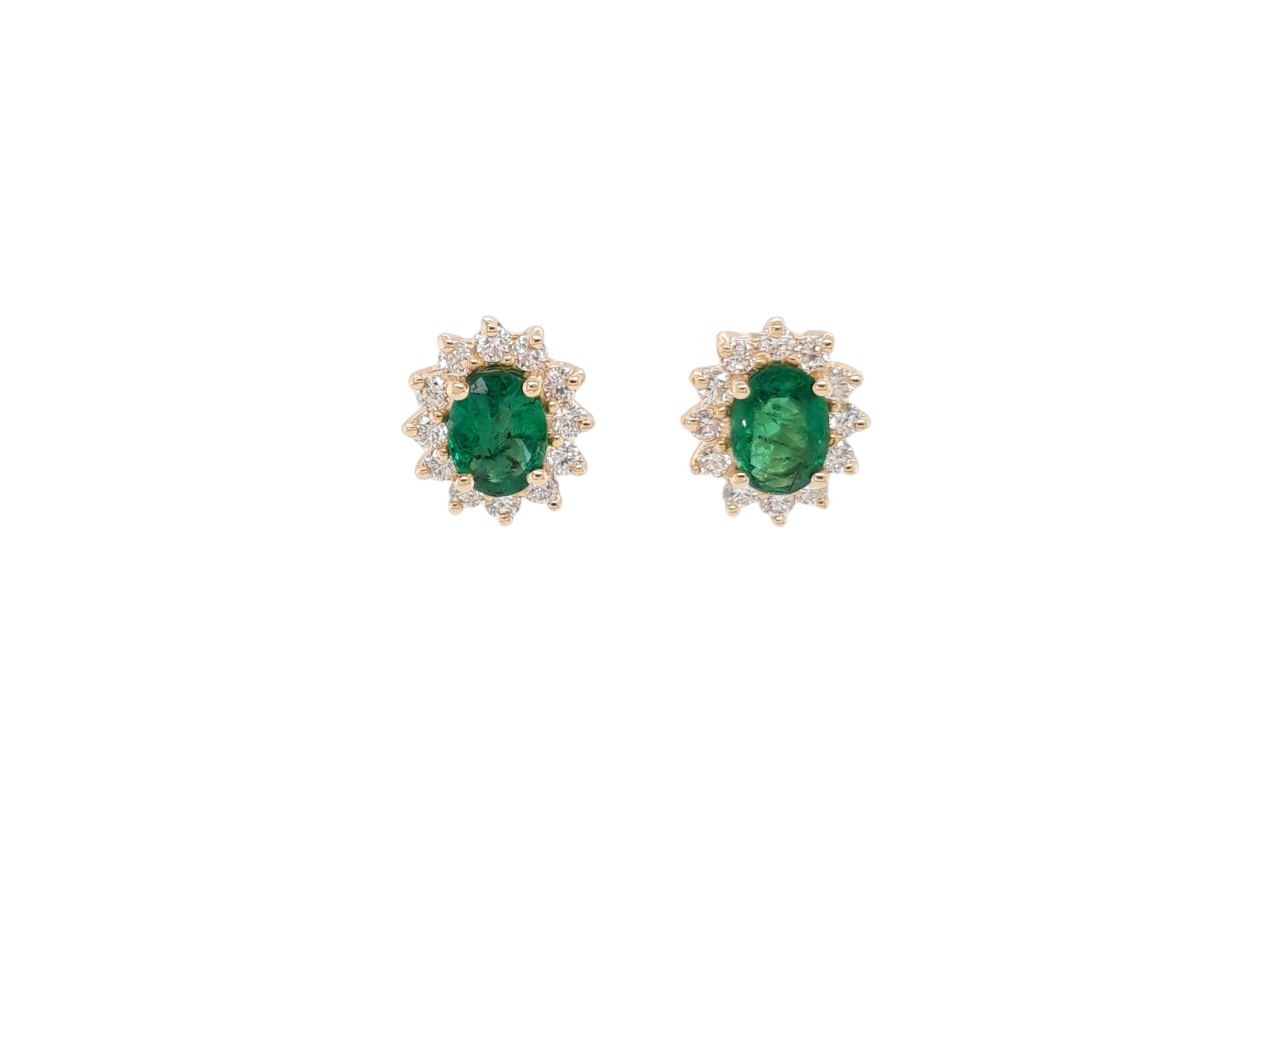 Ladies Diamond Earrings With Emeralds 2.17 Carats